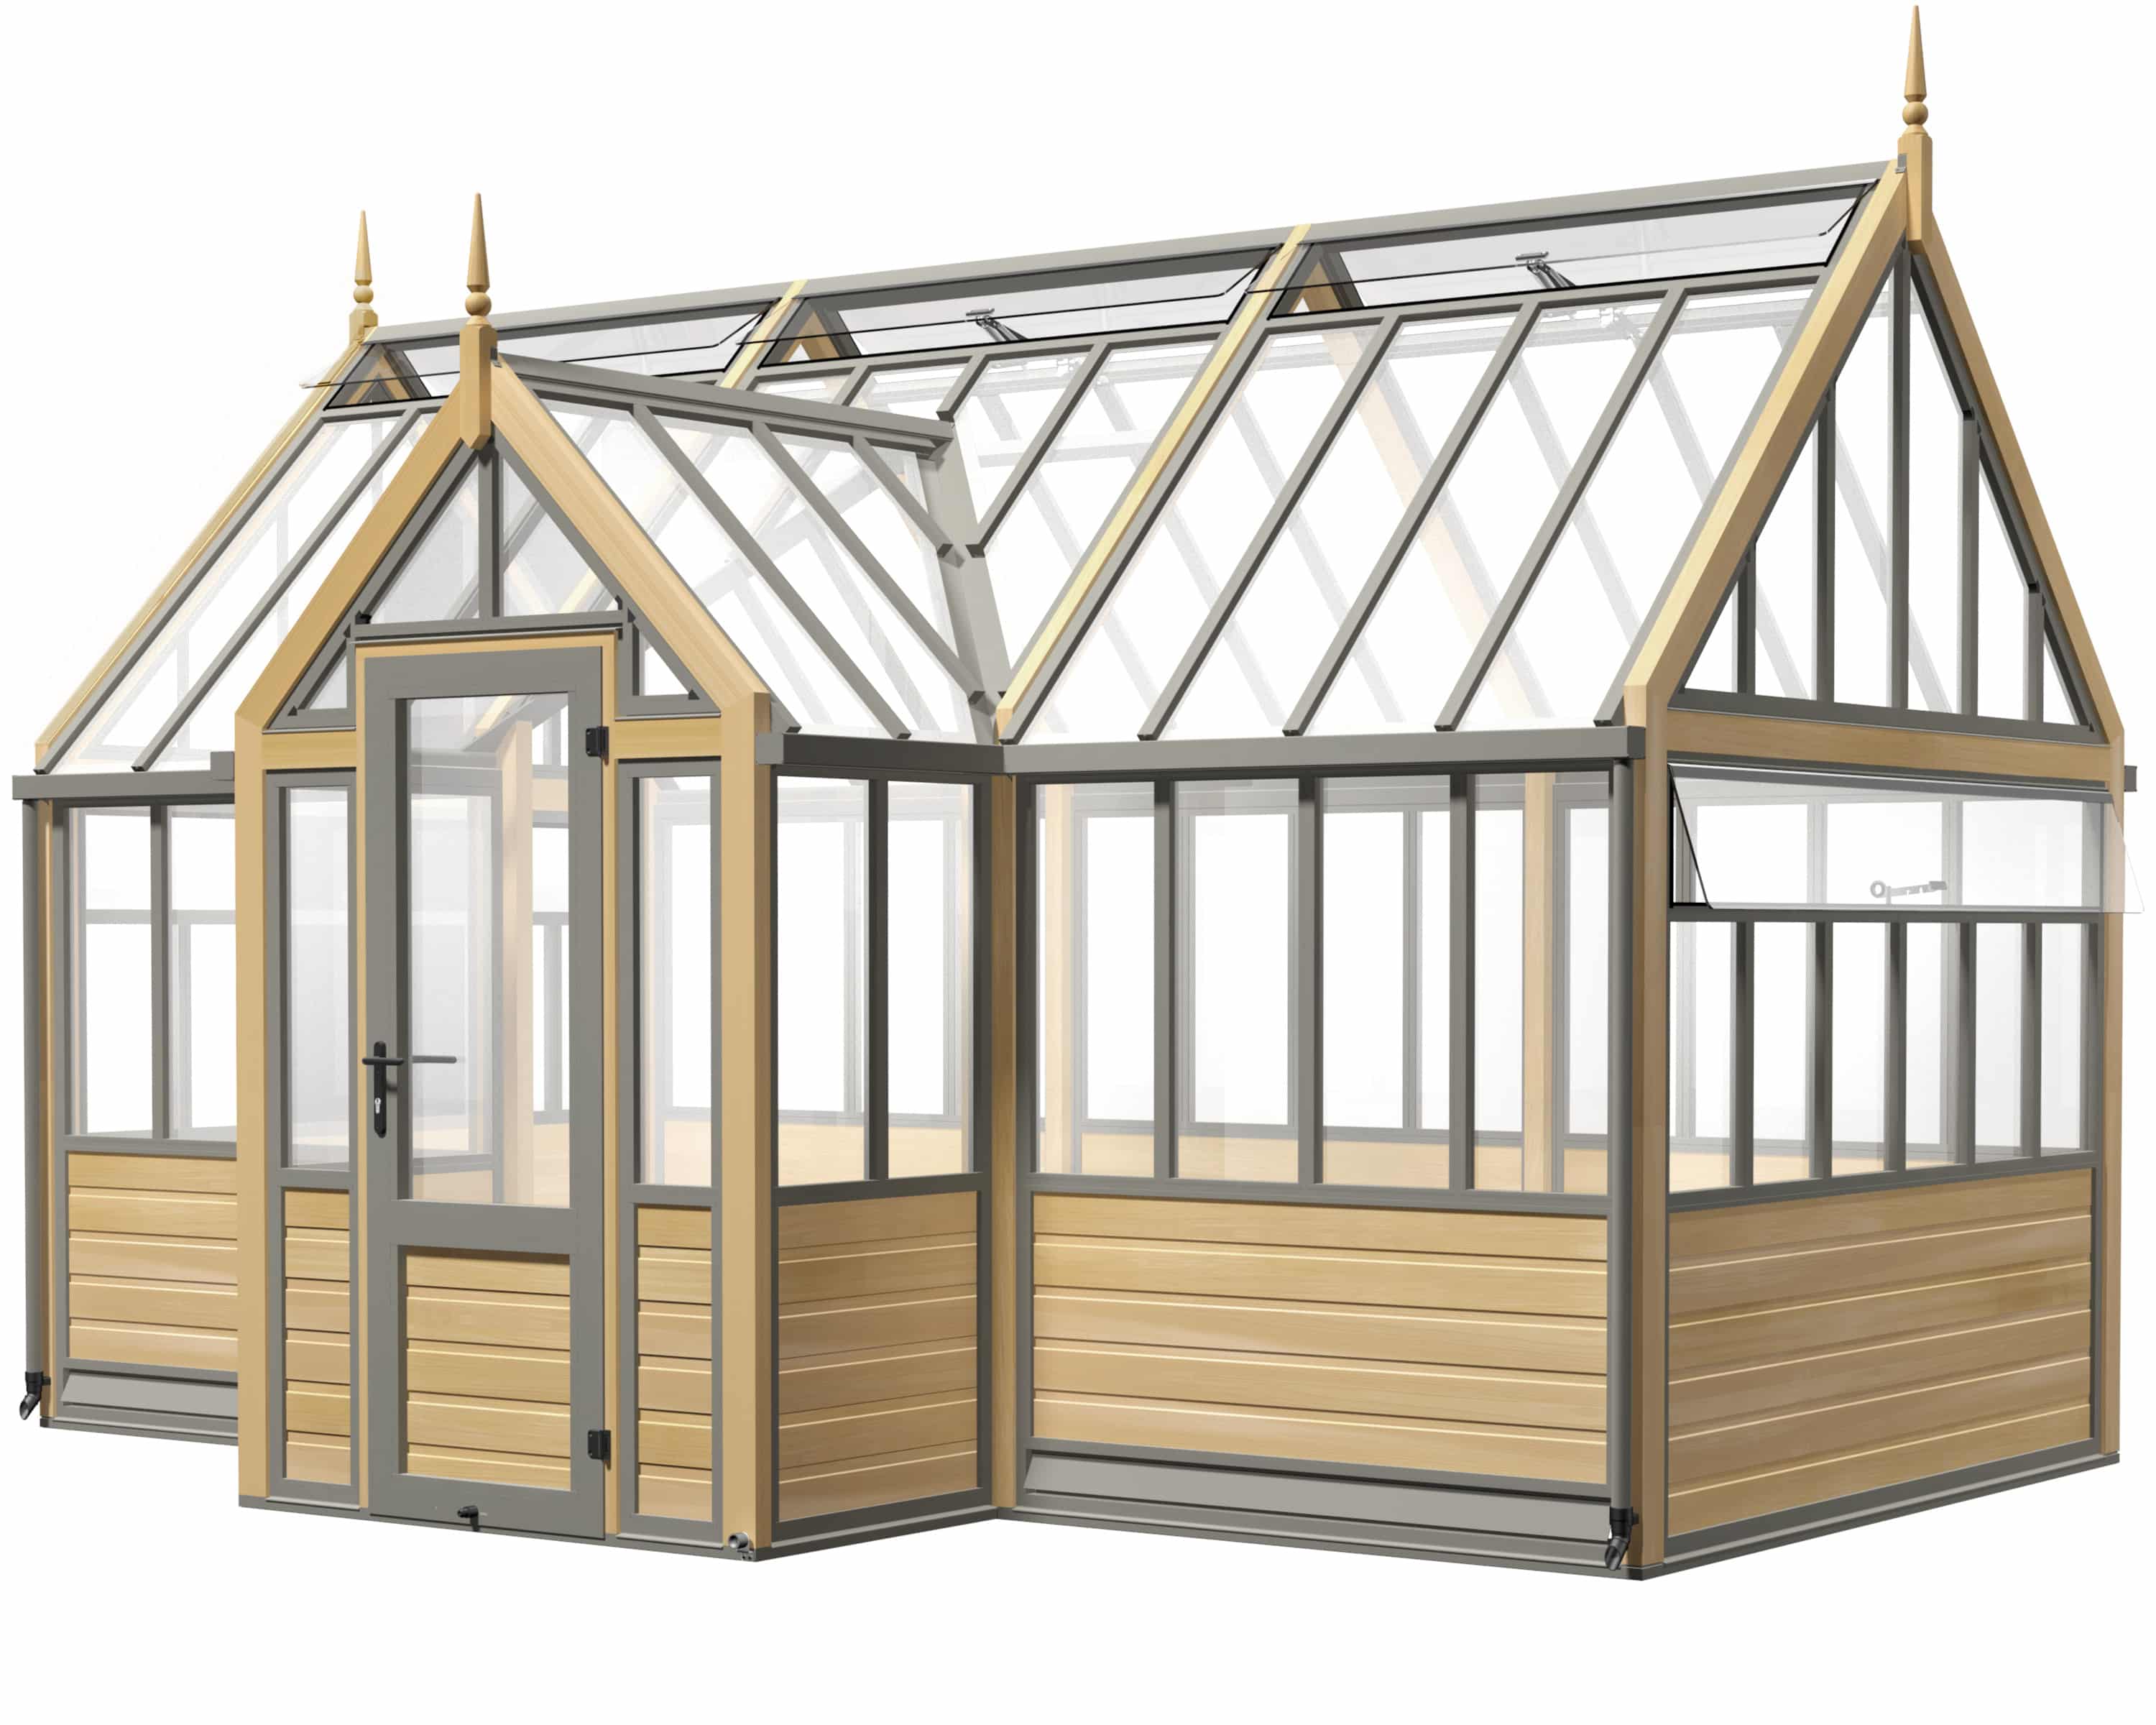 Traditional Wooden Glasshouses